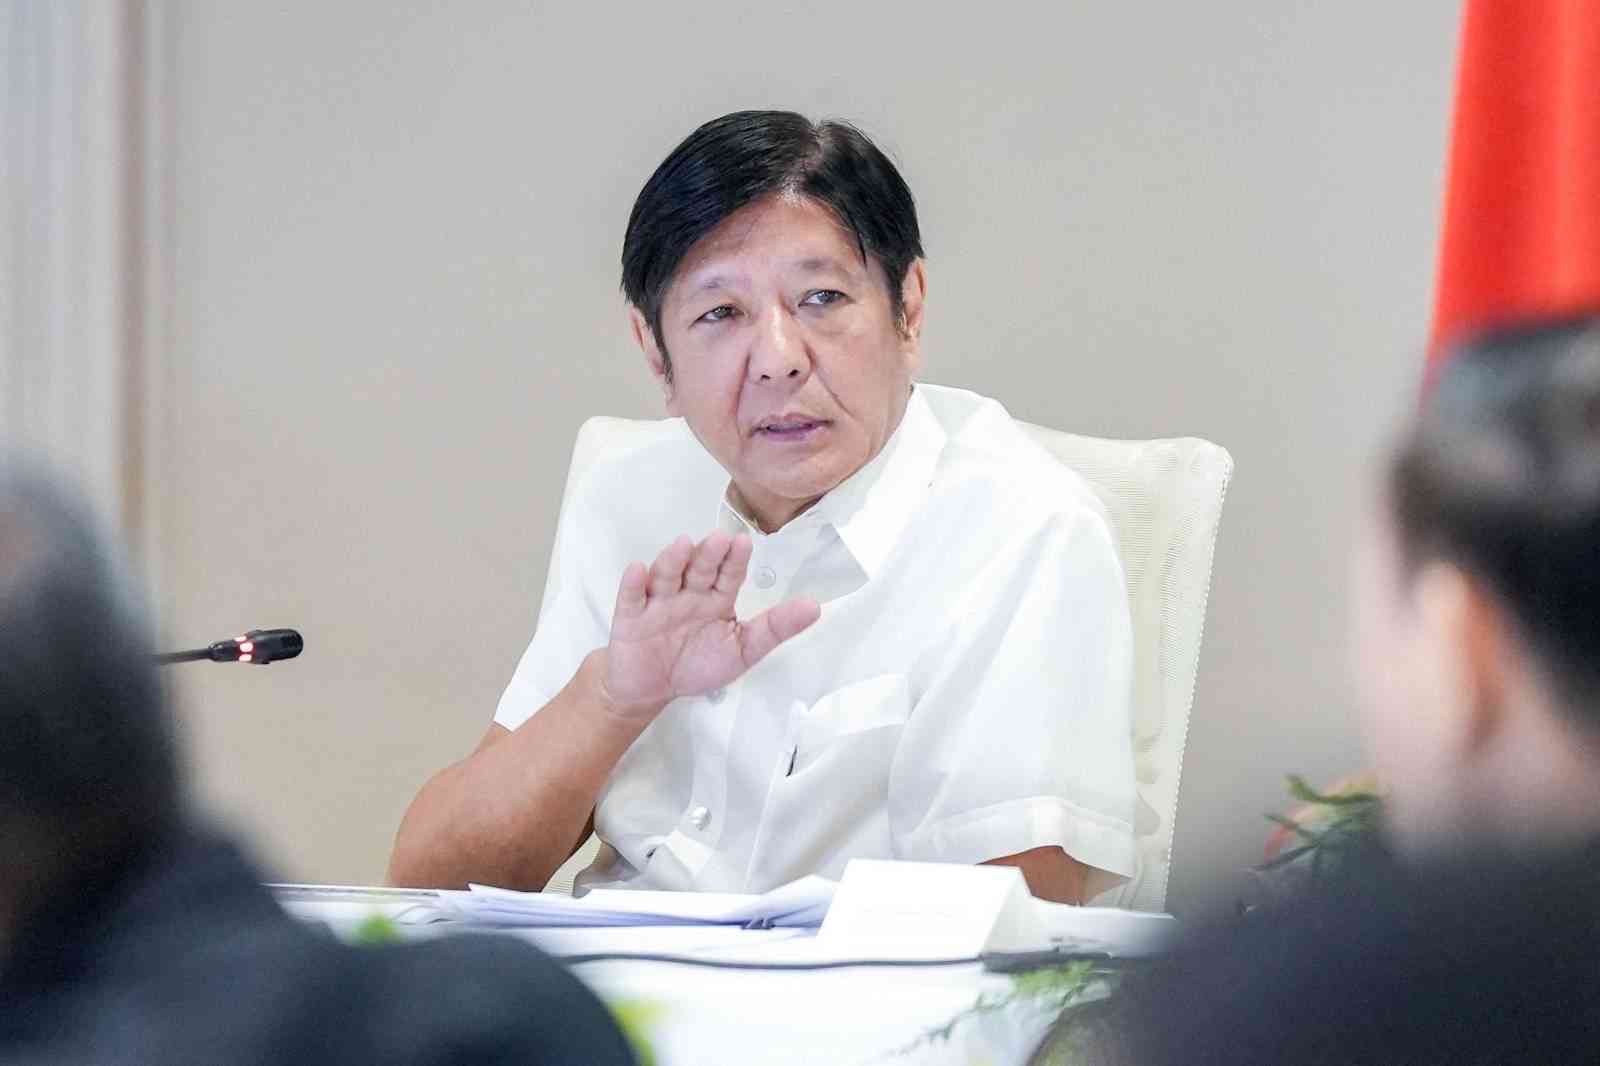 On Labor day, PBBM orders review of minimum wage rates